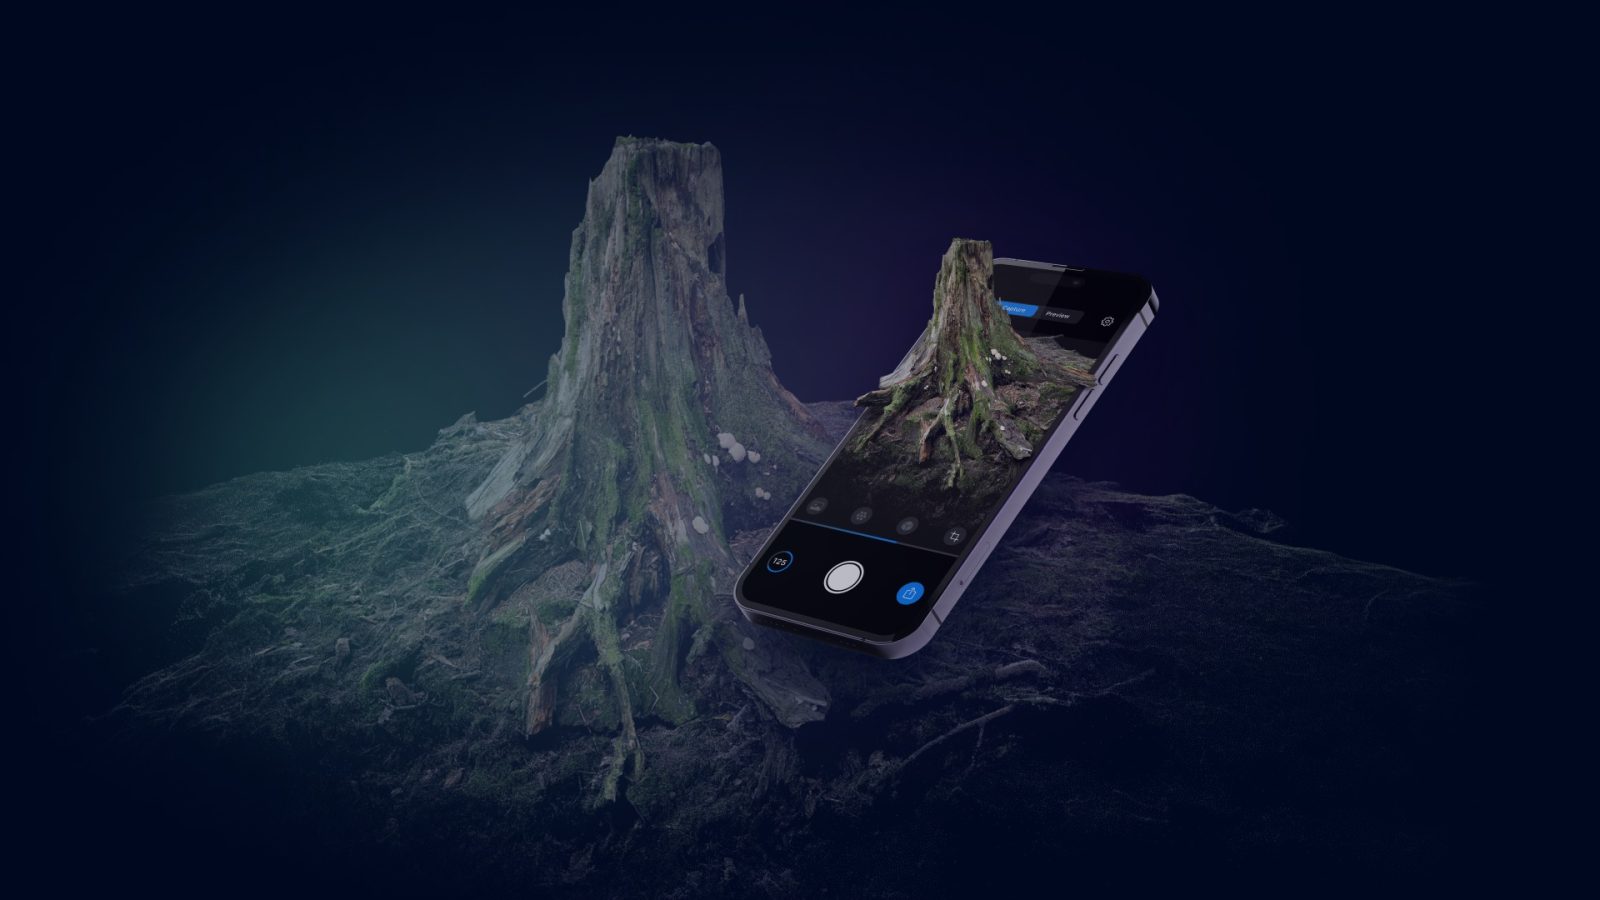 Epic Games 3D scanning app 'RealityScan' now available on the App Store for iPhone and iPad